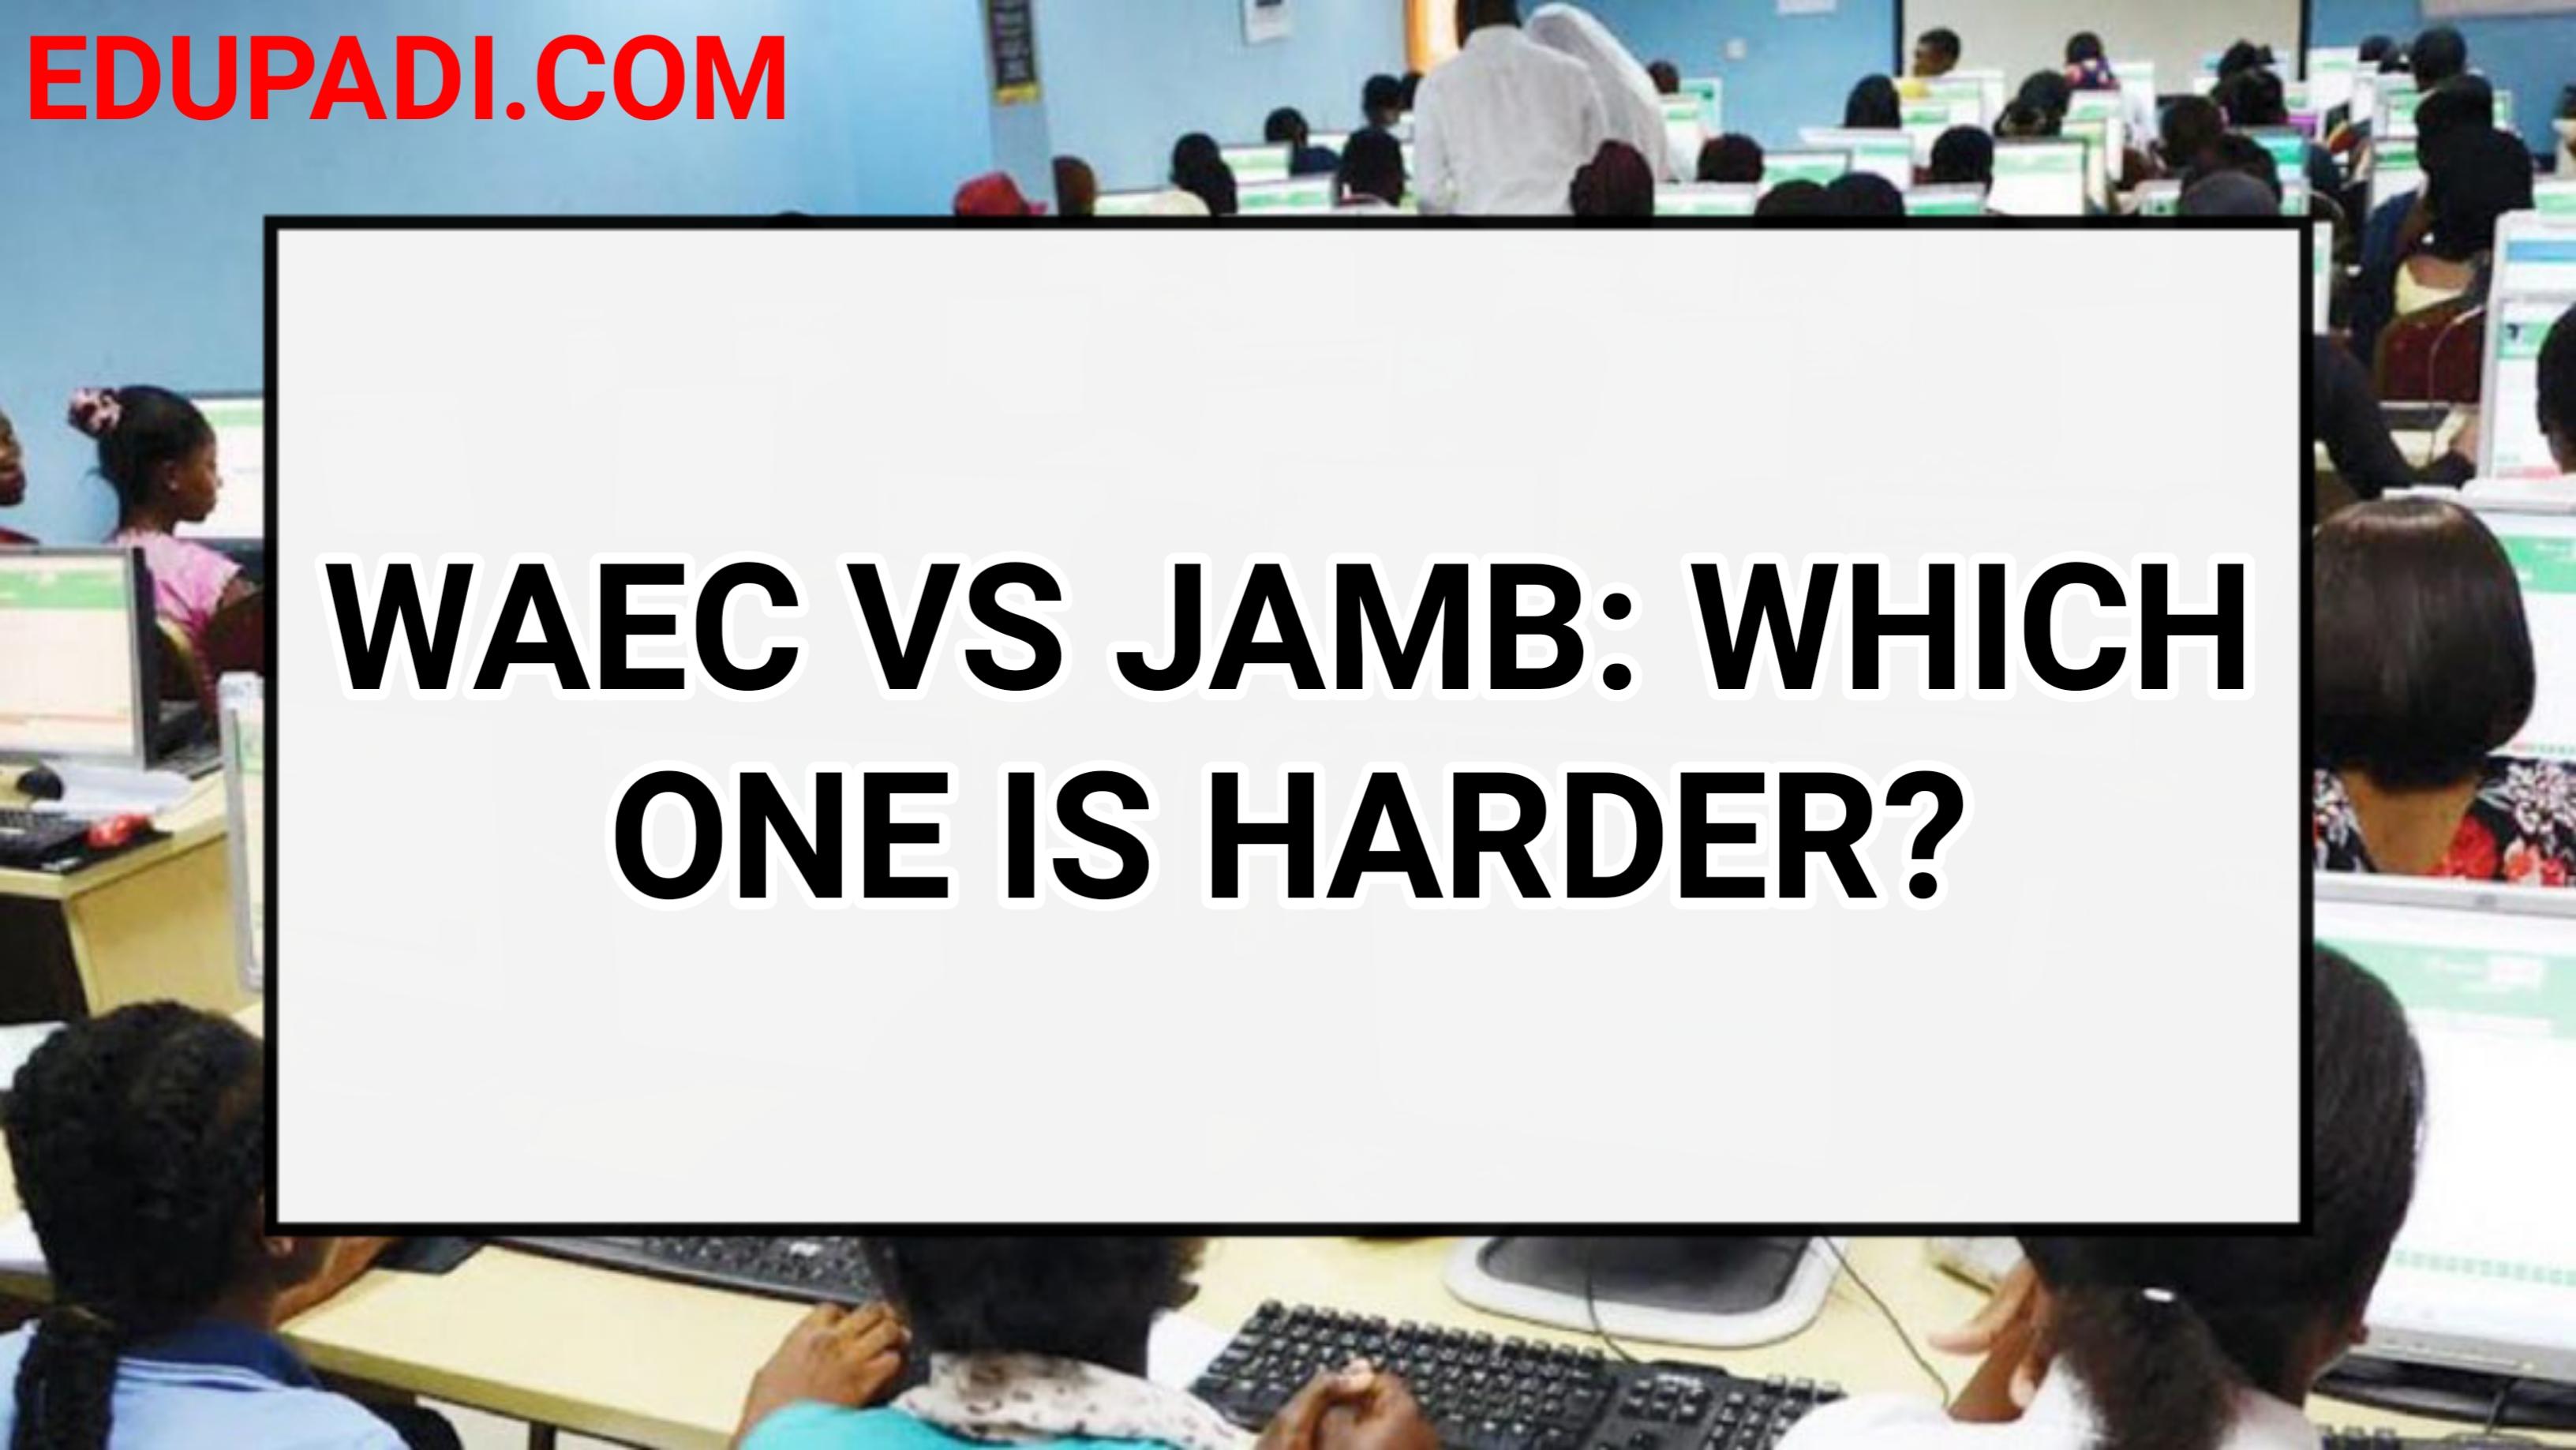 Cover Image for WAEC And JAMB: Which One Is Harder? Find Out!